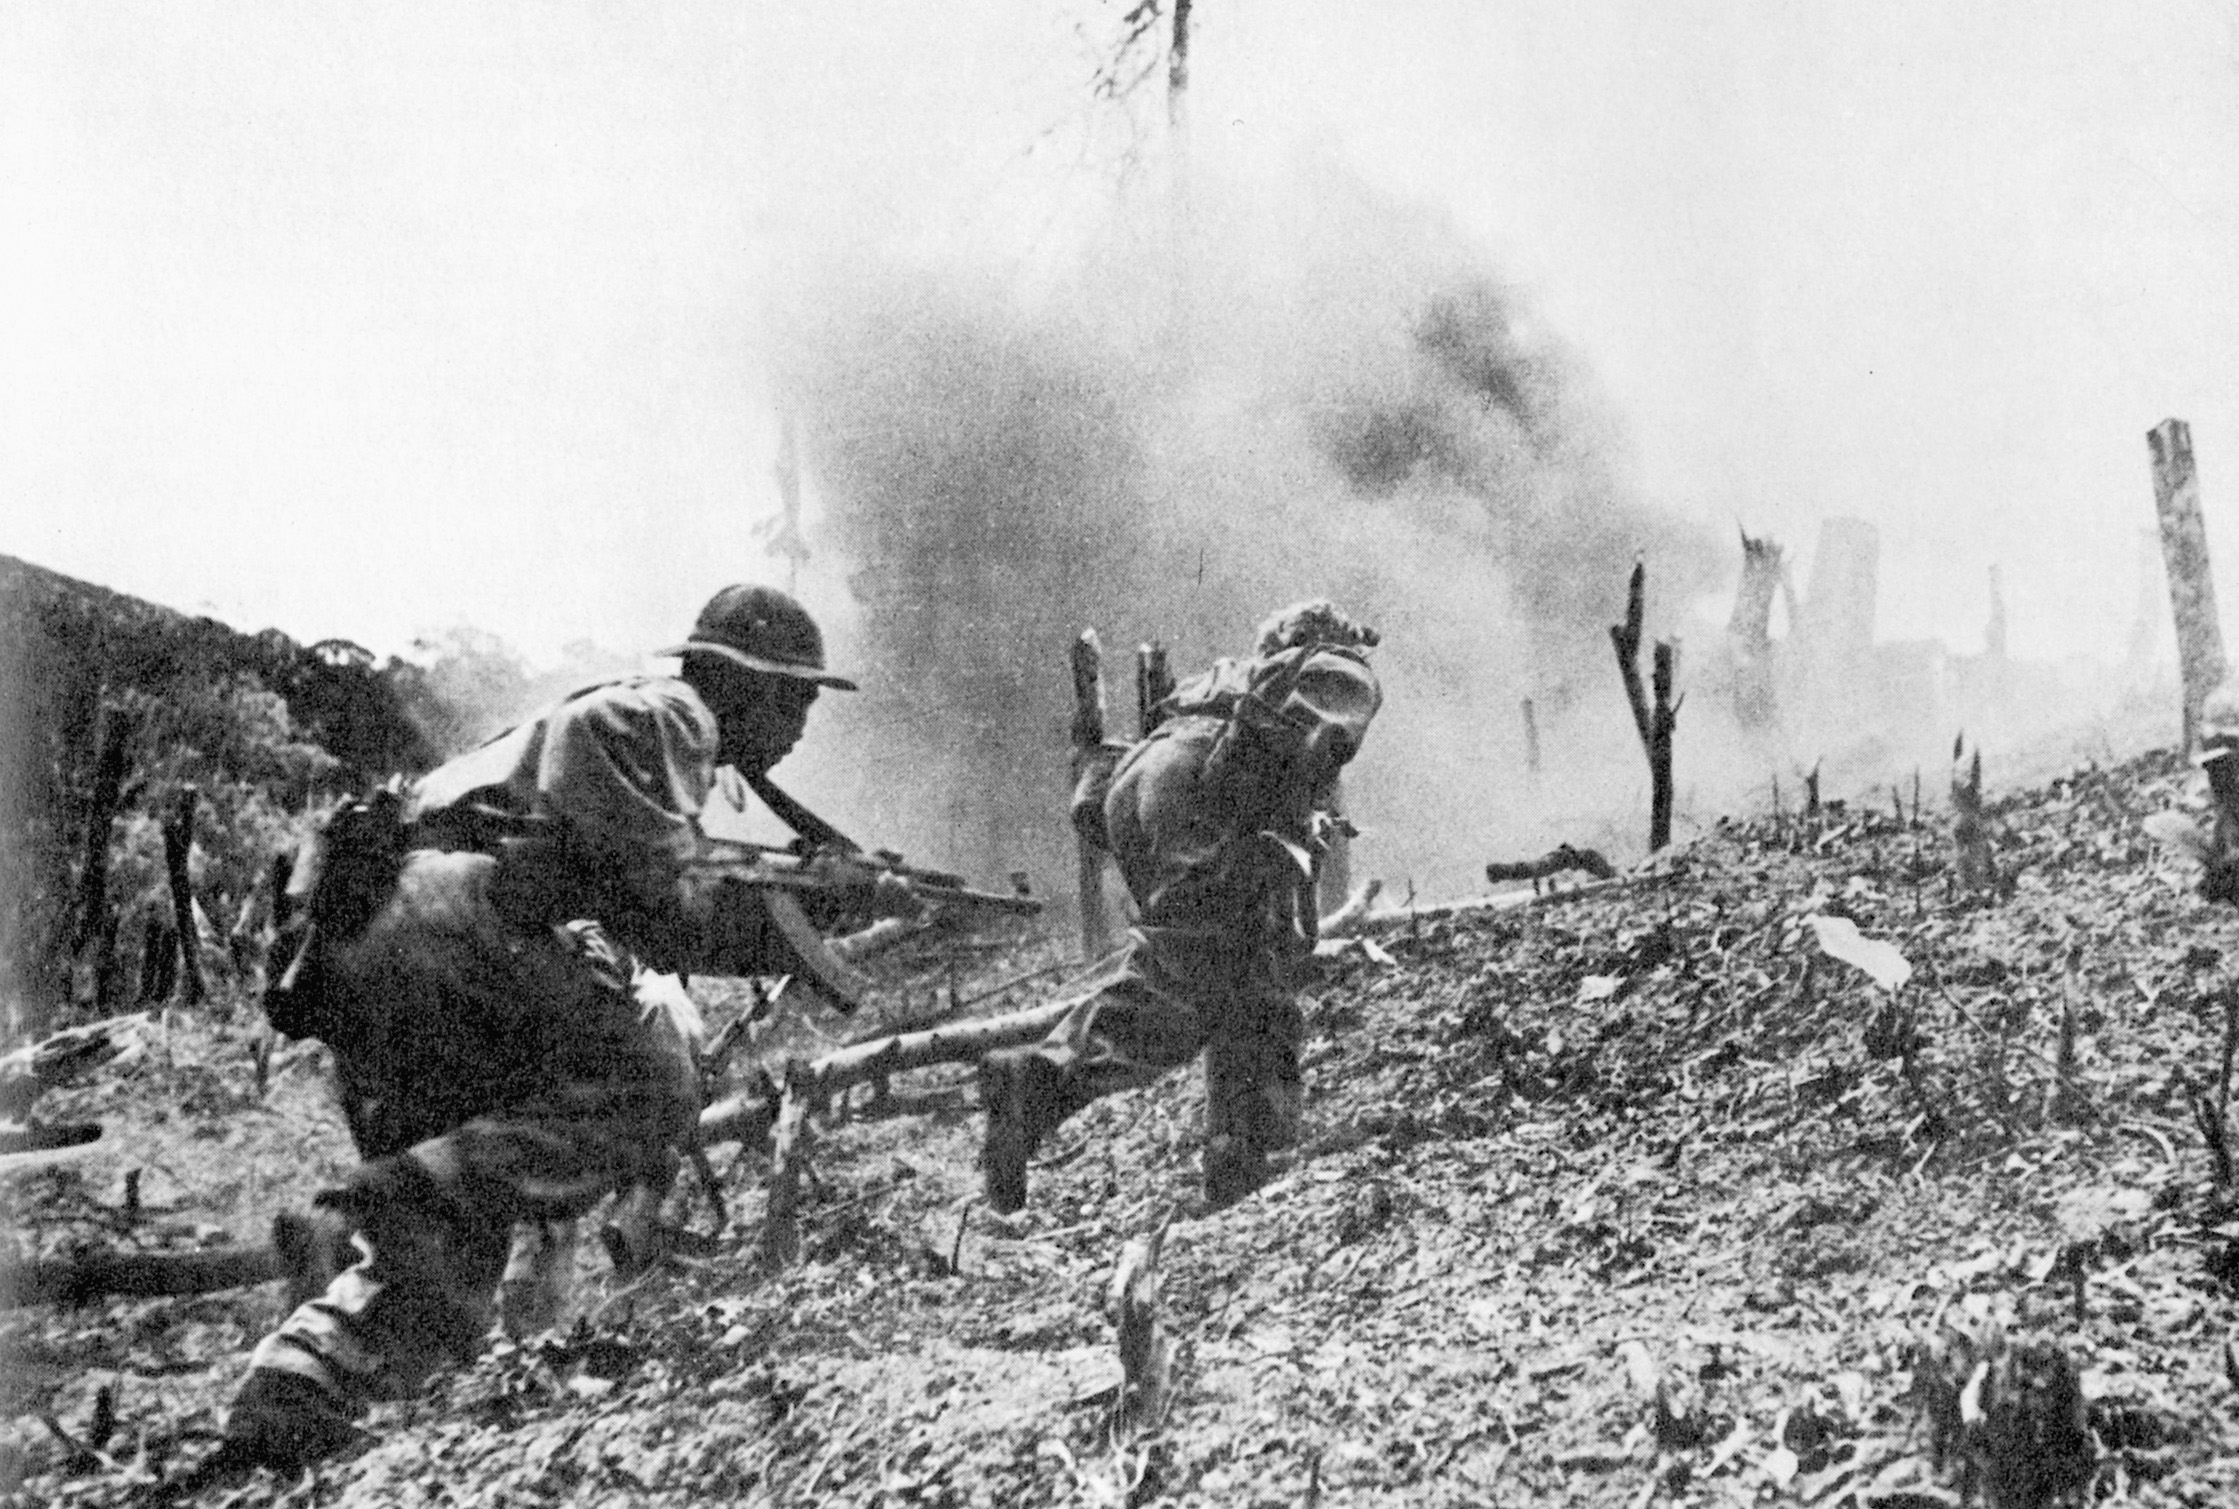 NVA soldiers charge an American position near Khe Sanh. Most NVA attacks were made at night.